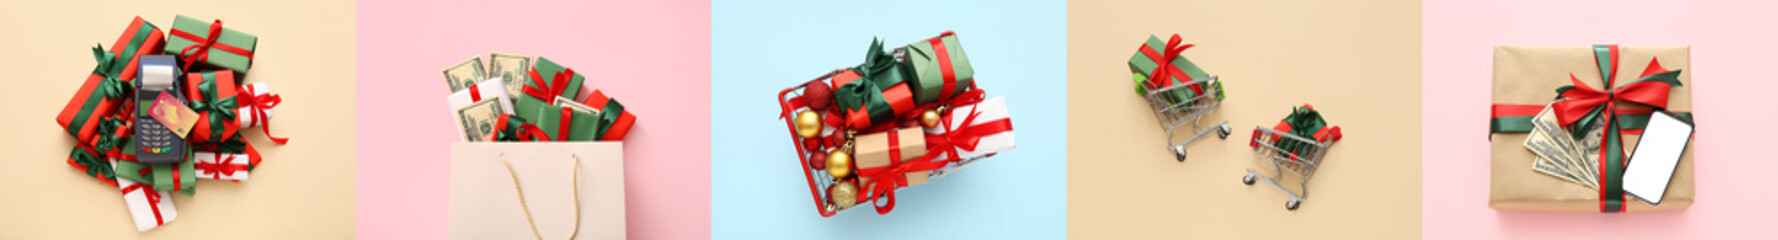 Set of Christmas gifts with shopping carts, payment terminal and money on color background